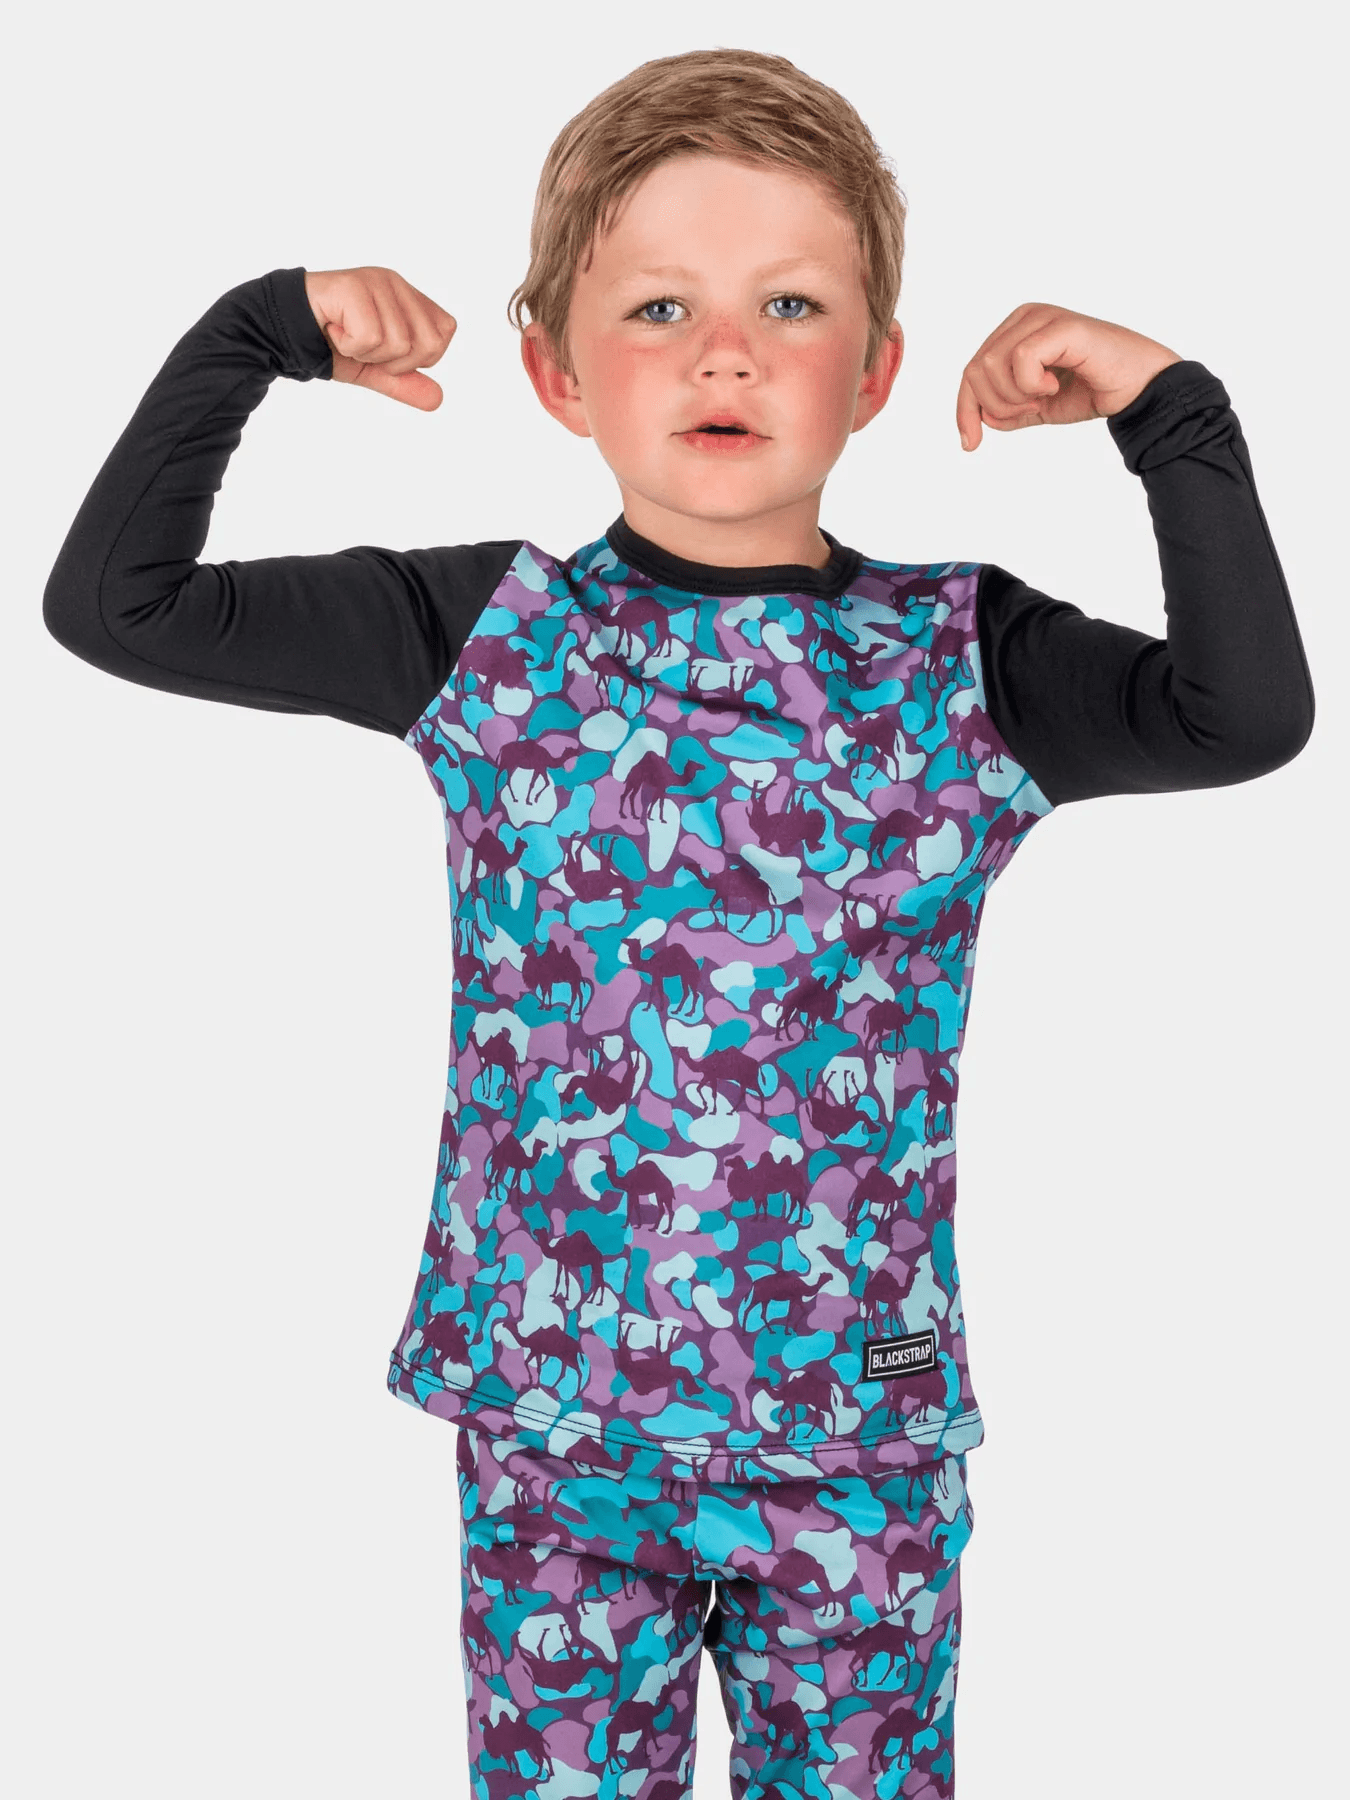 Blackstrap Kids Therma M/W Base Layer Crew 2022 - Mountain Kids Outfitters: Camelflauge Aquatic, Front View